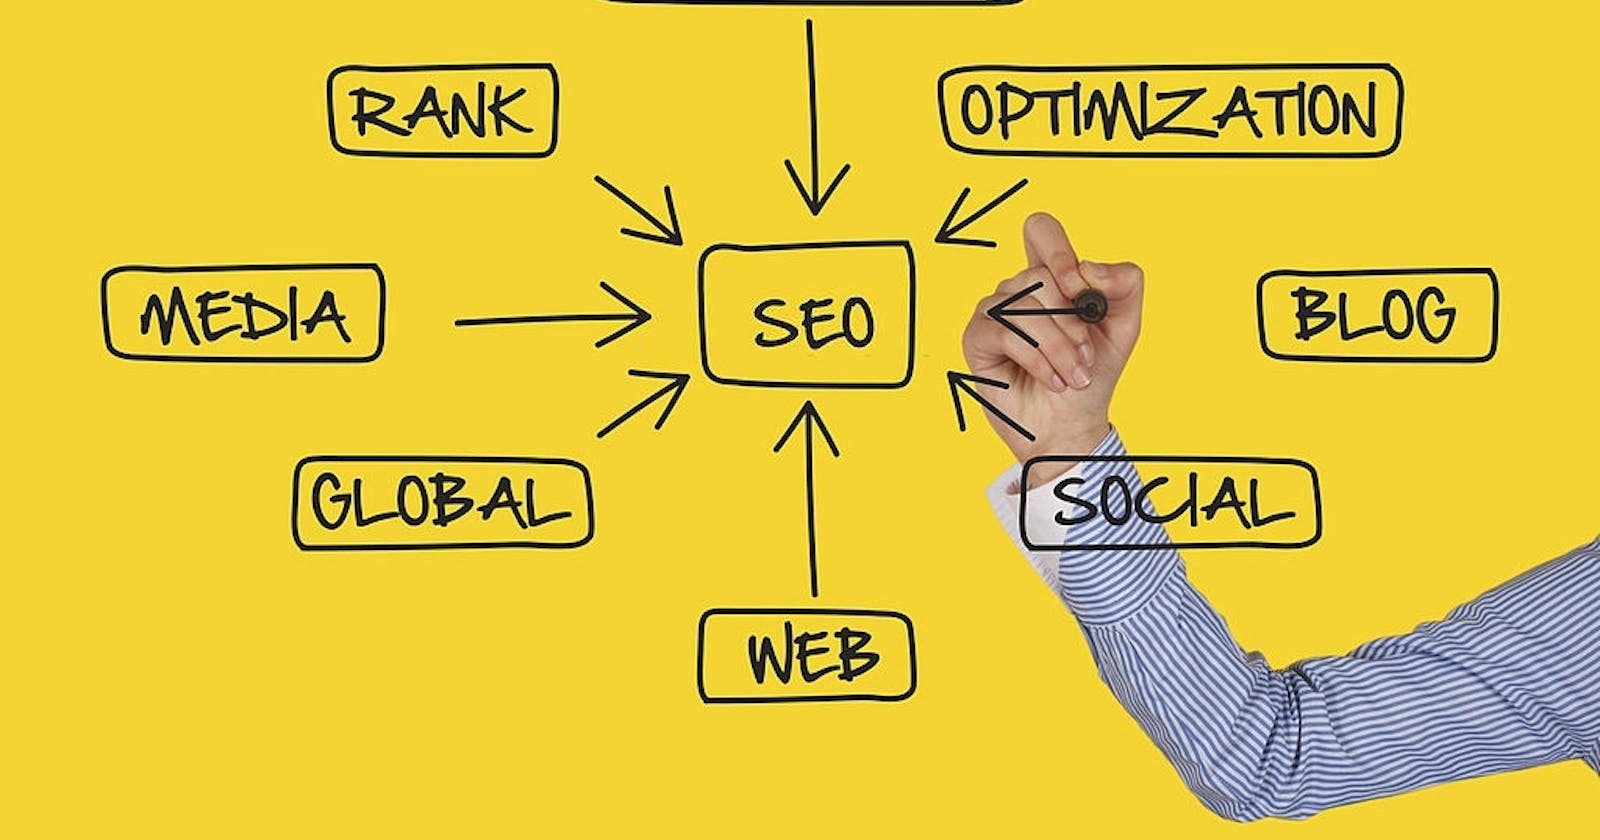 I Want to Talk About What is SEO and its Indicators